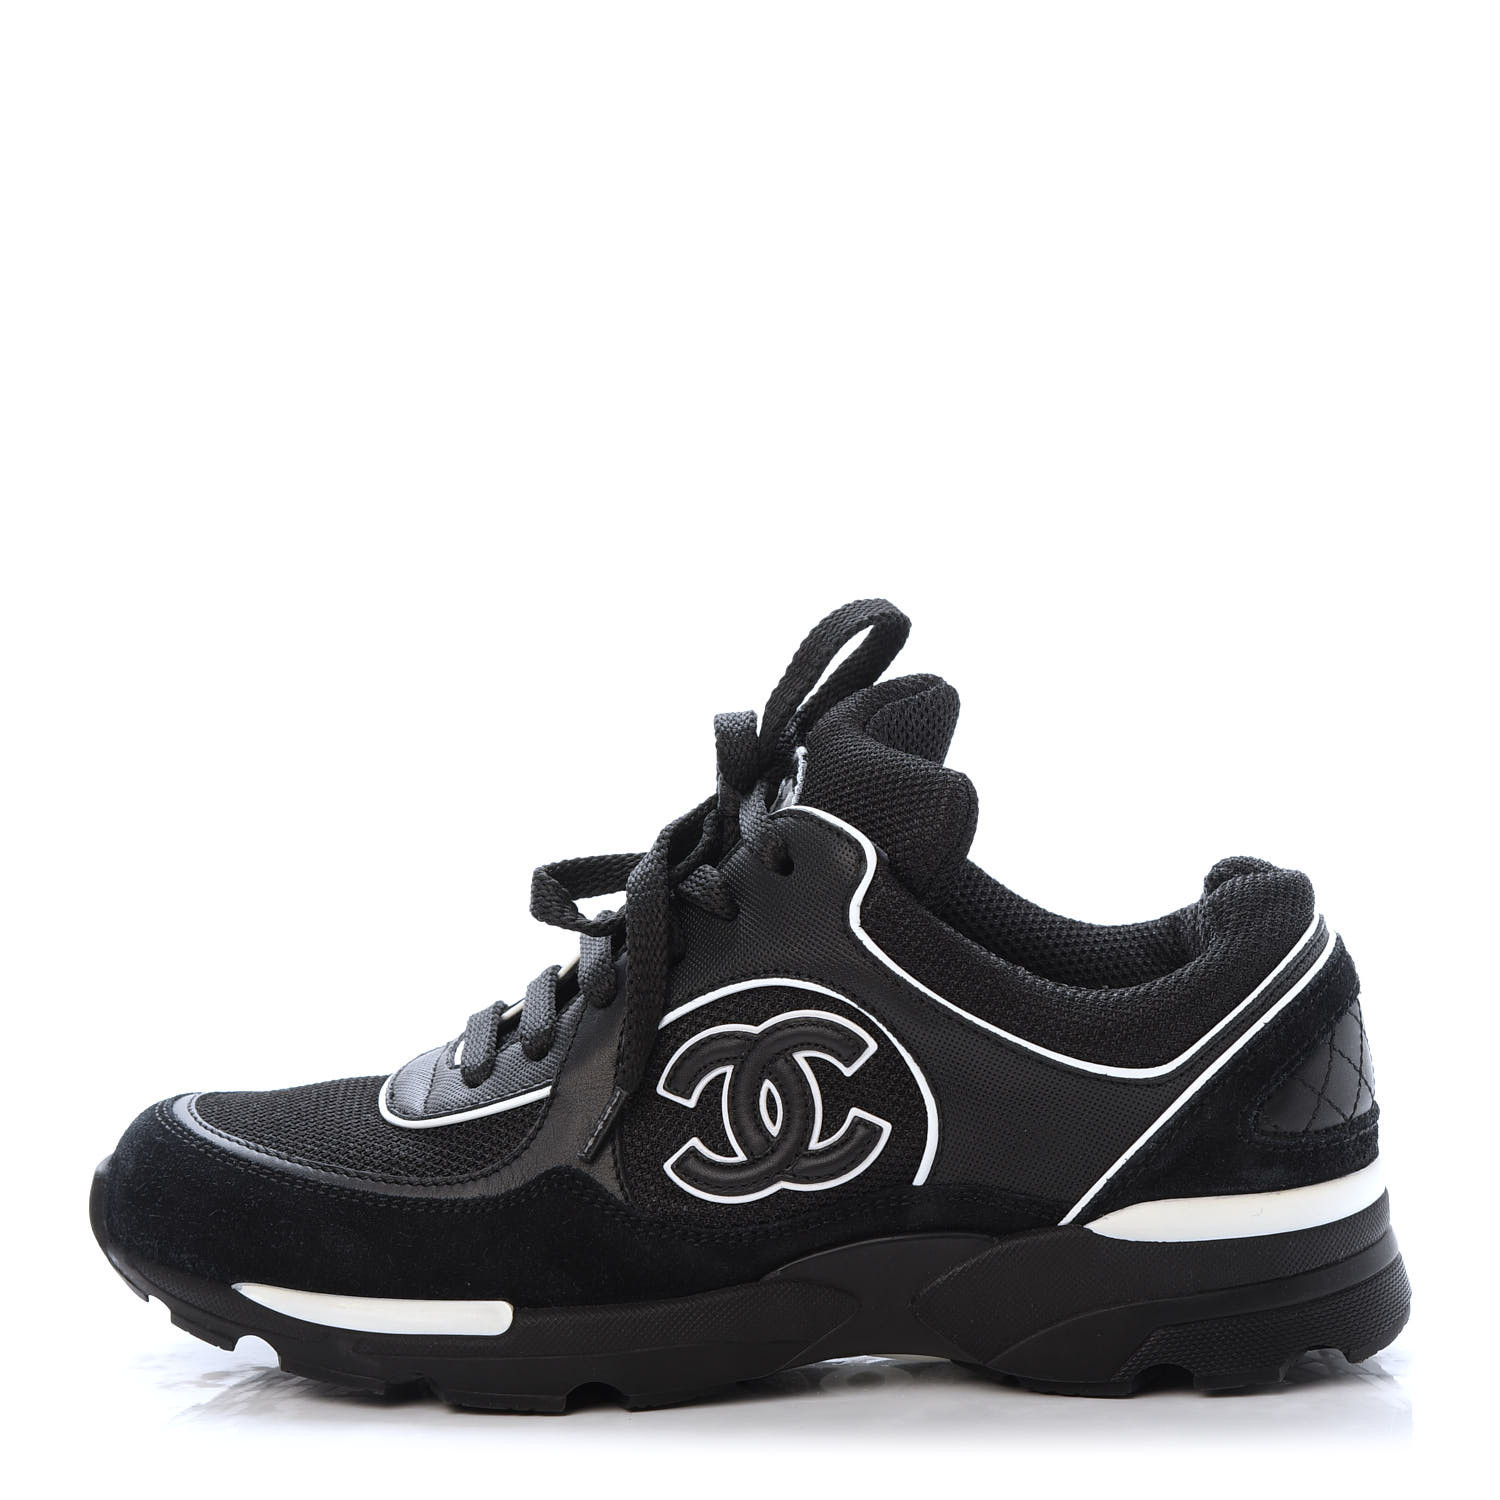 CHANEL Toile Suede Calfskin CC Sneakers 36 Black White 737135 ...